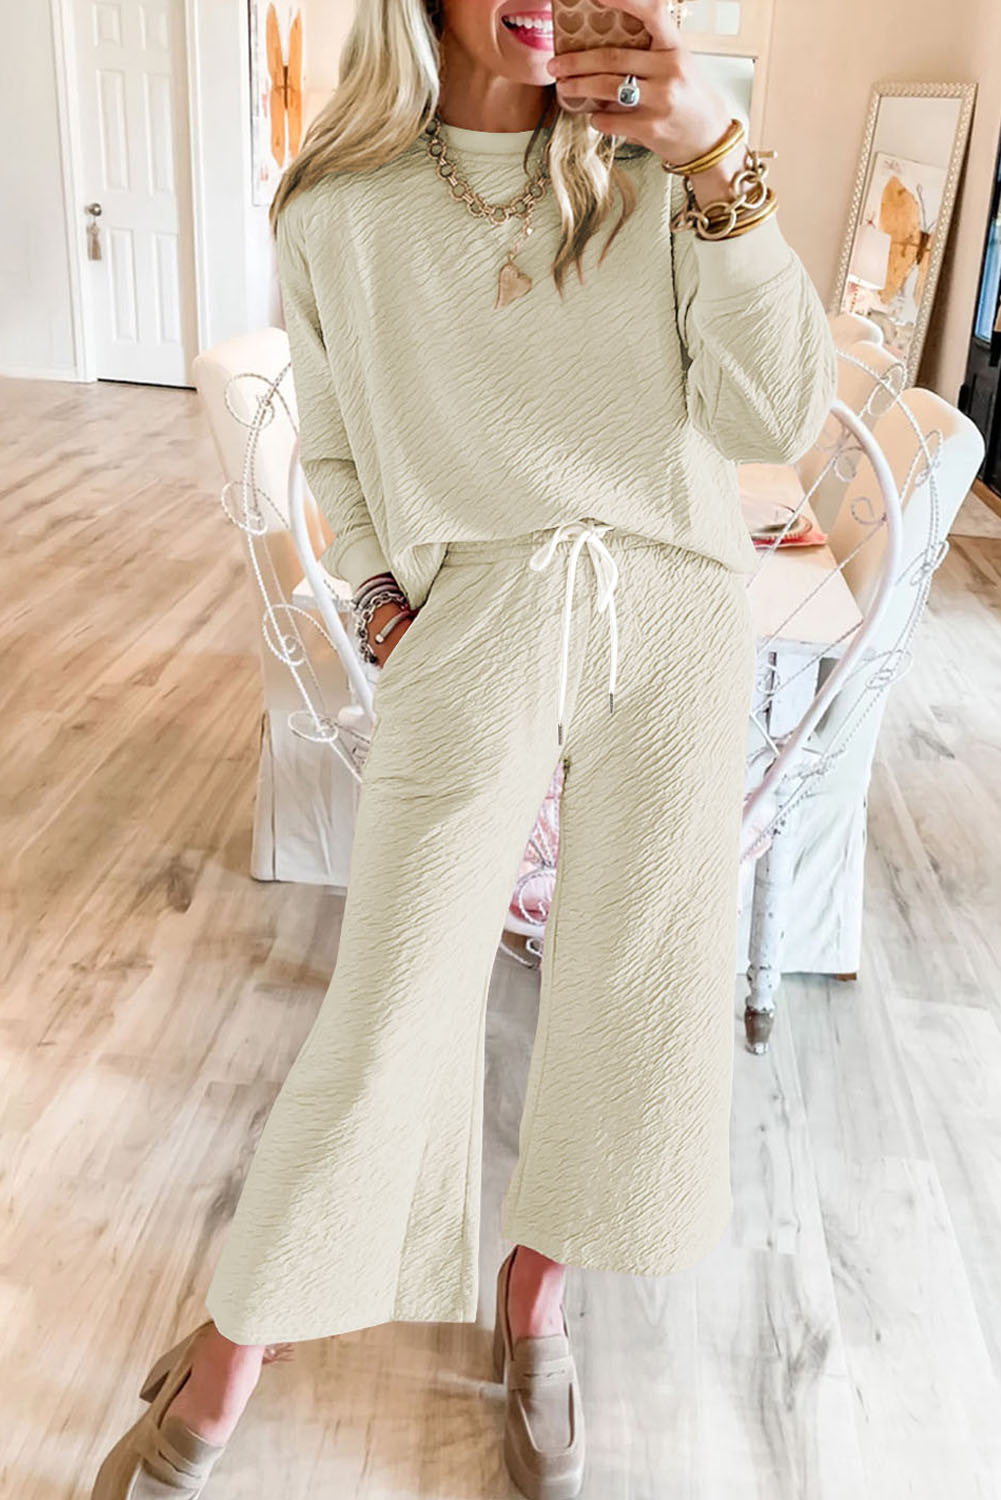 Shewin Wholesale Elegant White Solid Color Textured Long Sleeve Top and PANTS Set